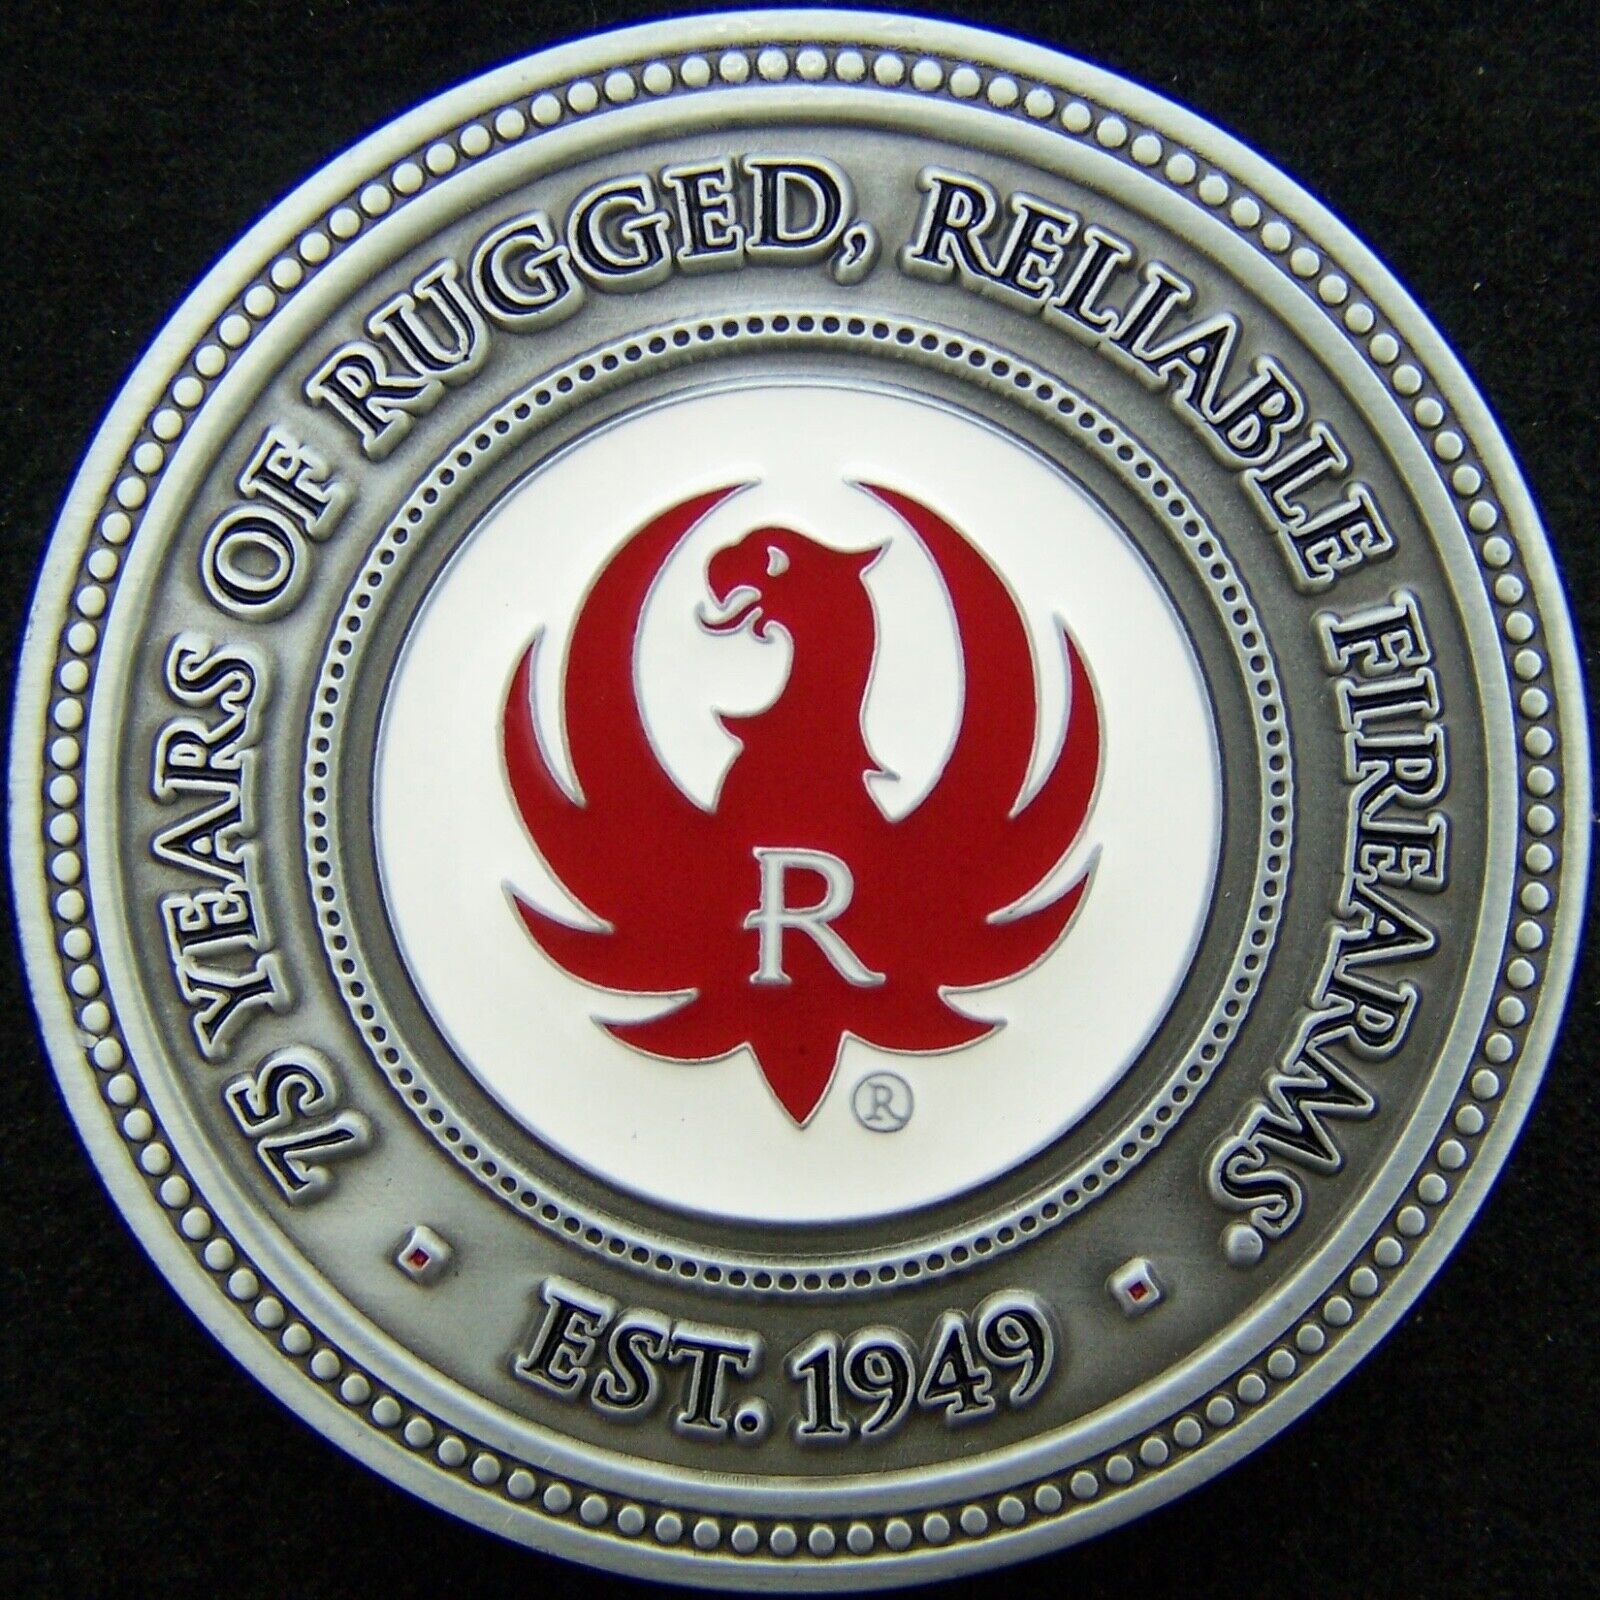 Ruger Firearms 75th Anniversary Challenge Coin